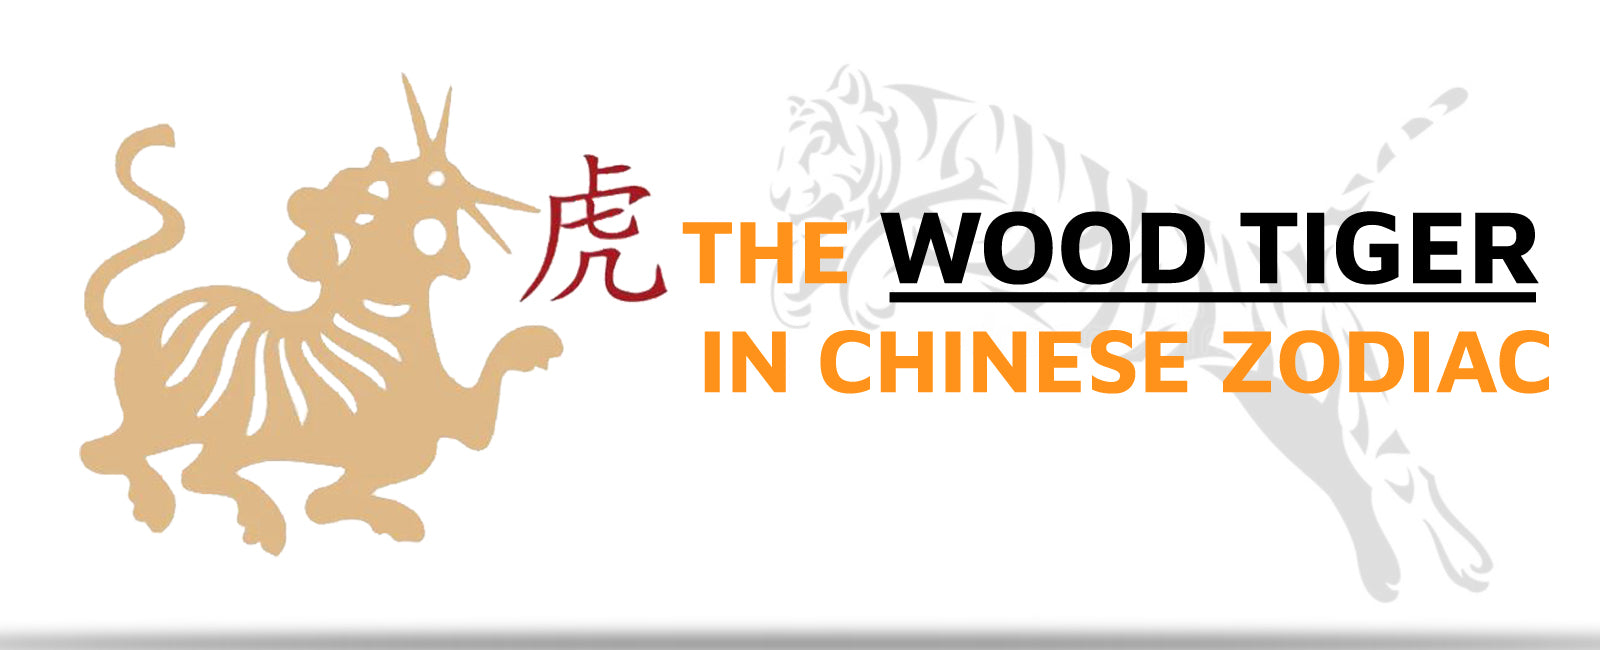 The Wood Tiger in Chinese Zodiac